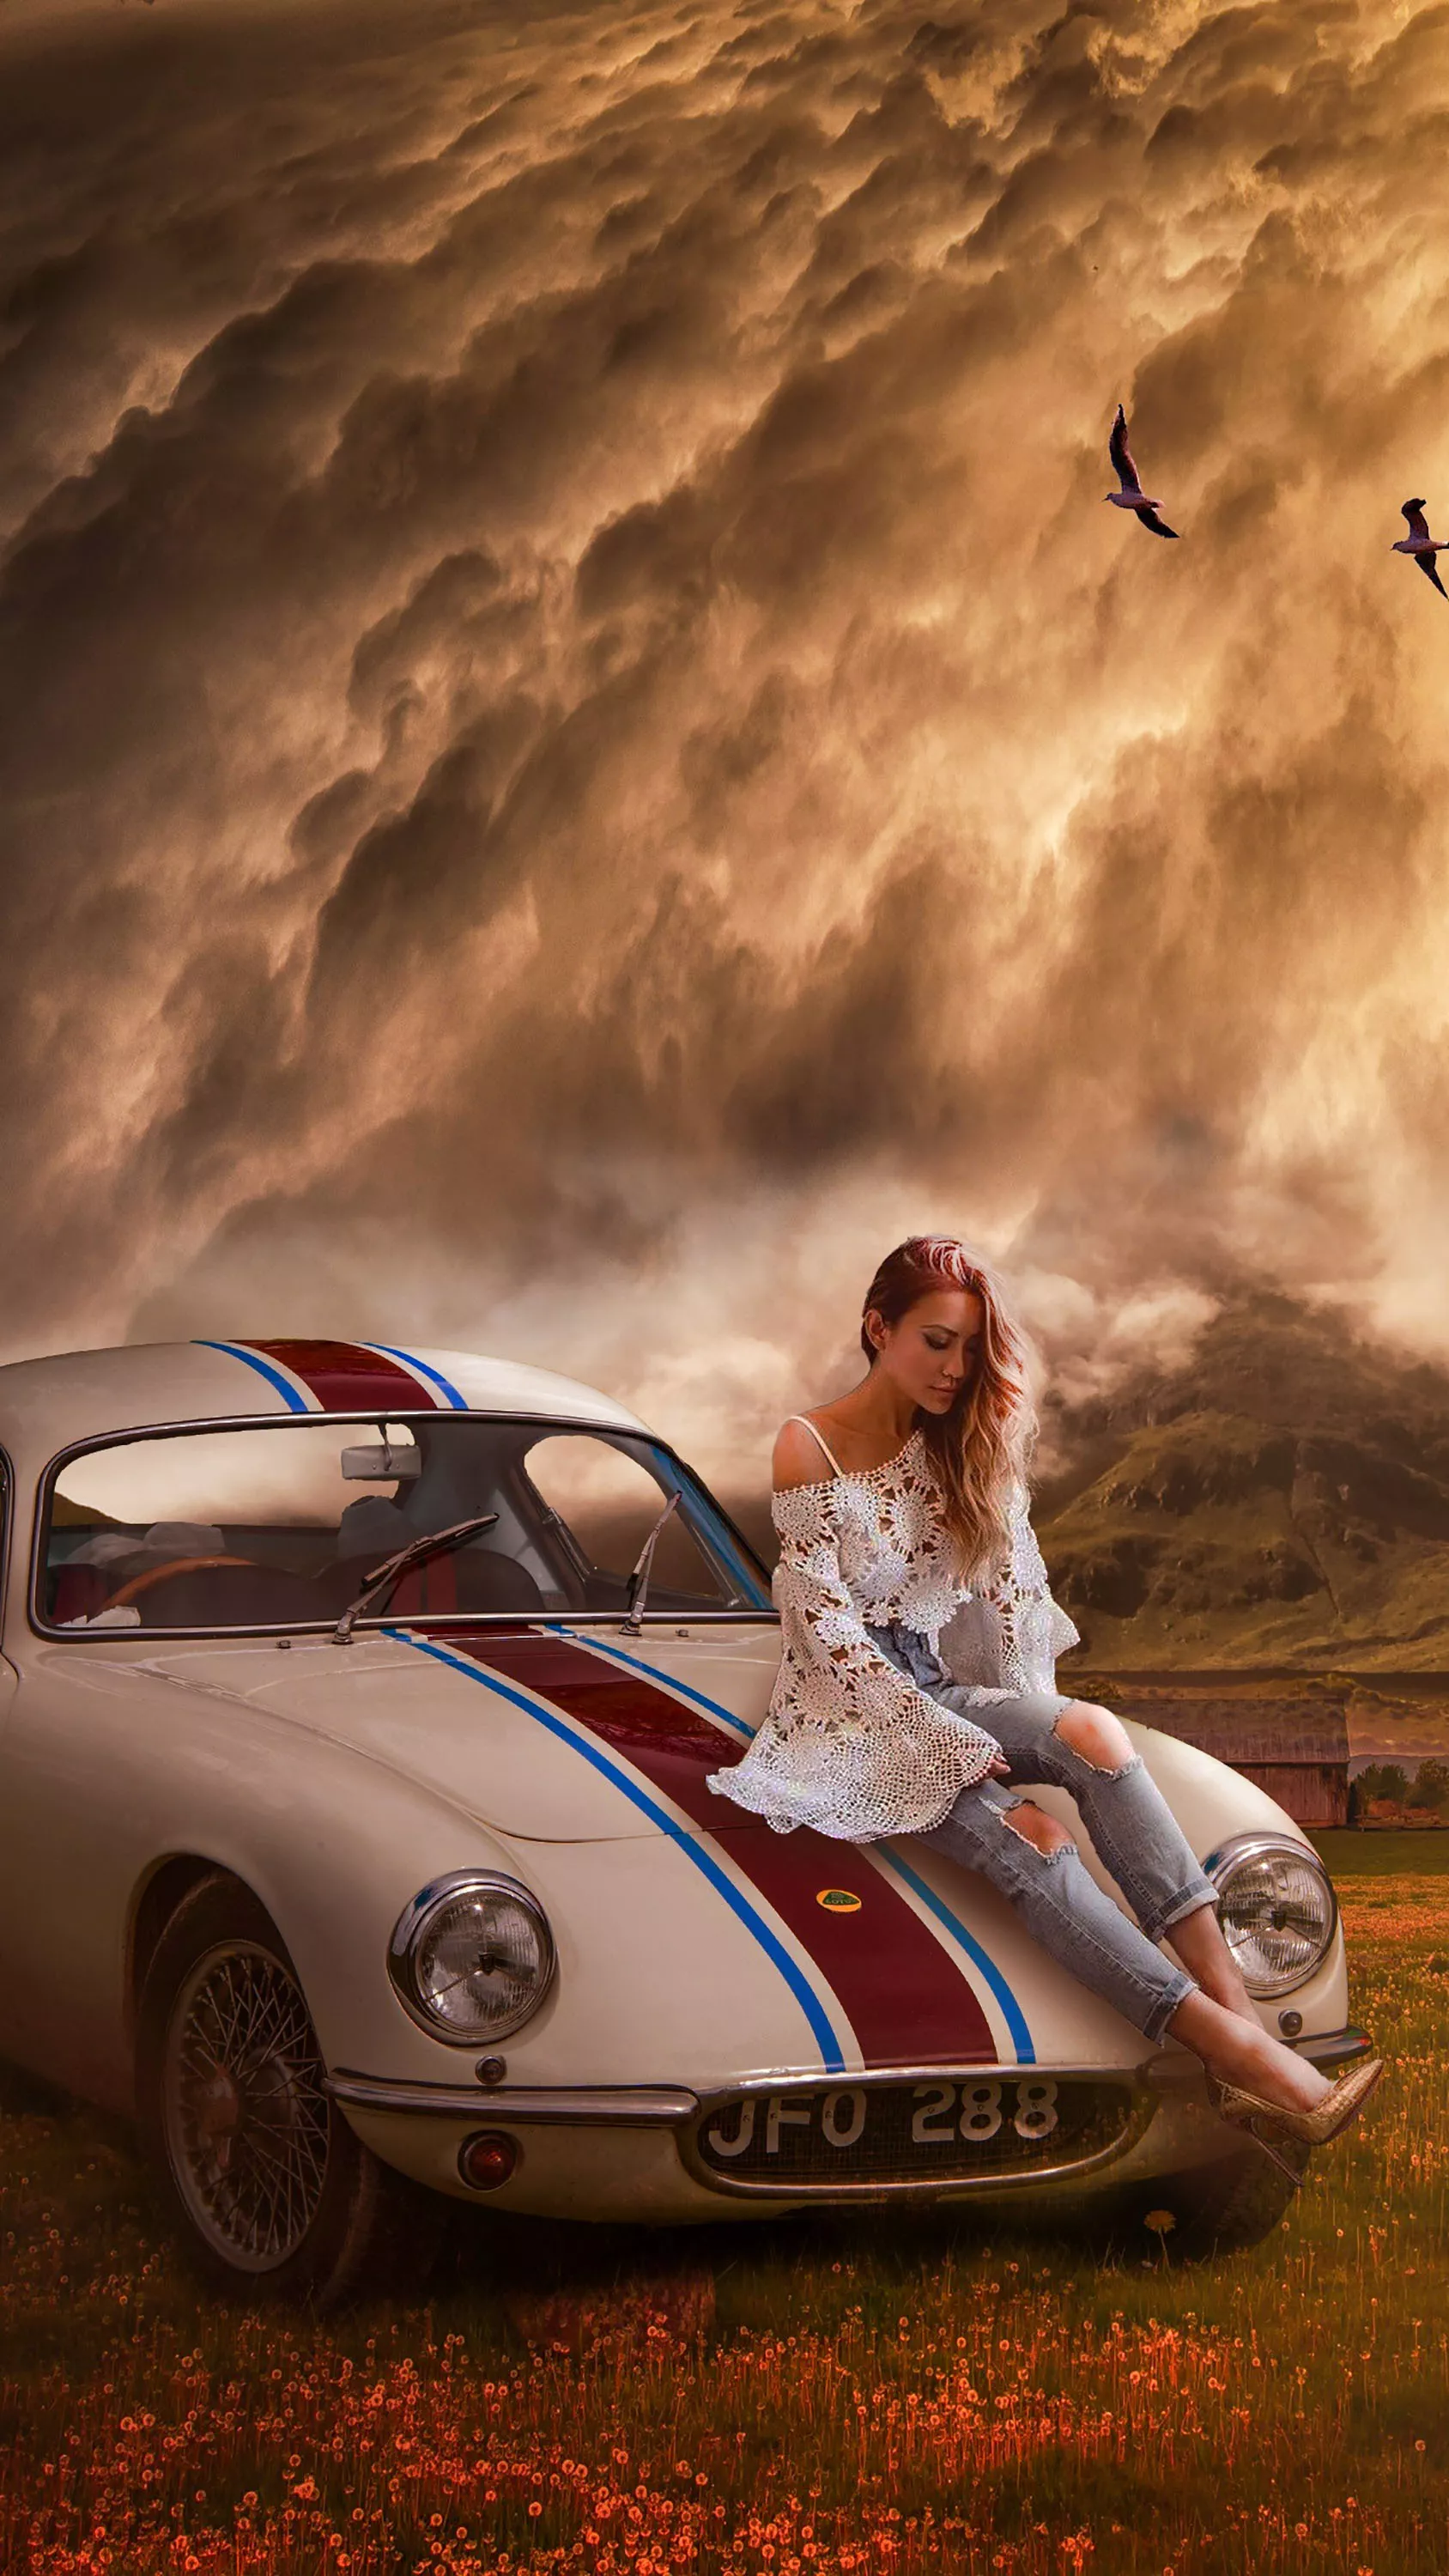 thumb for Needs Help Birds Car Ford Girl Jeans Lonely Sky Walllpaper